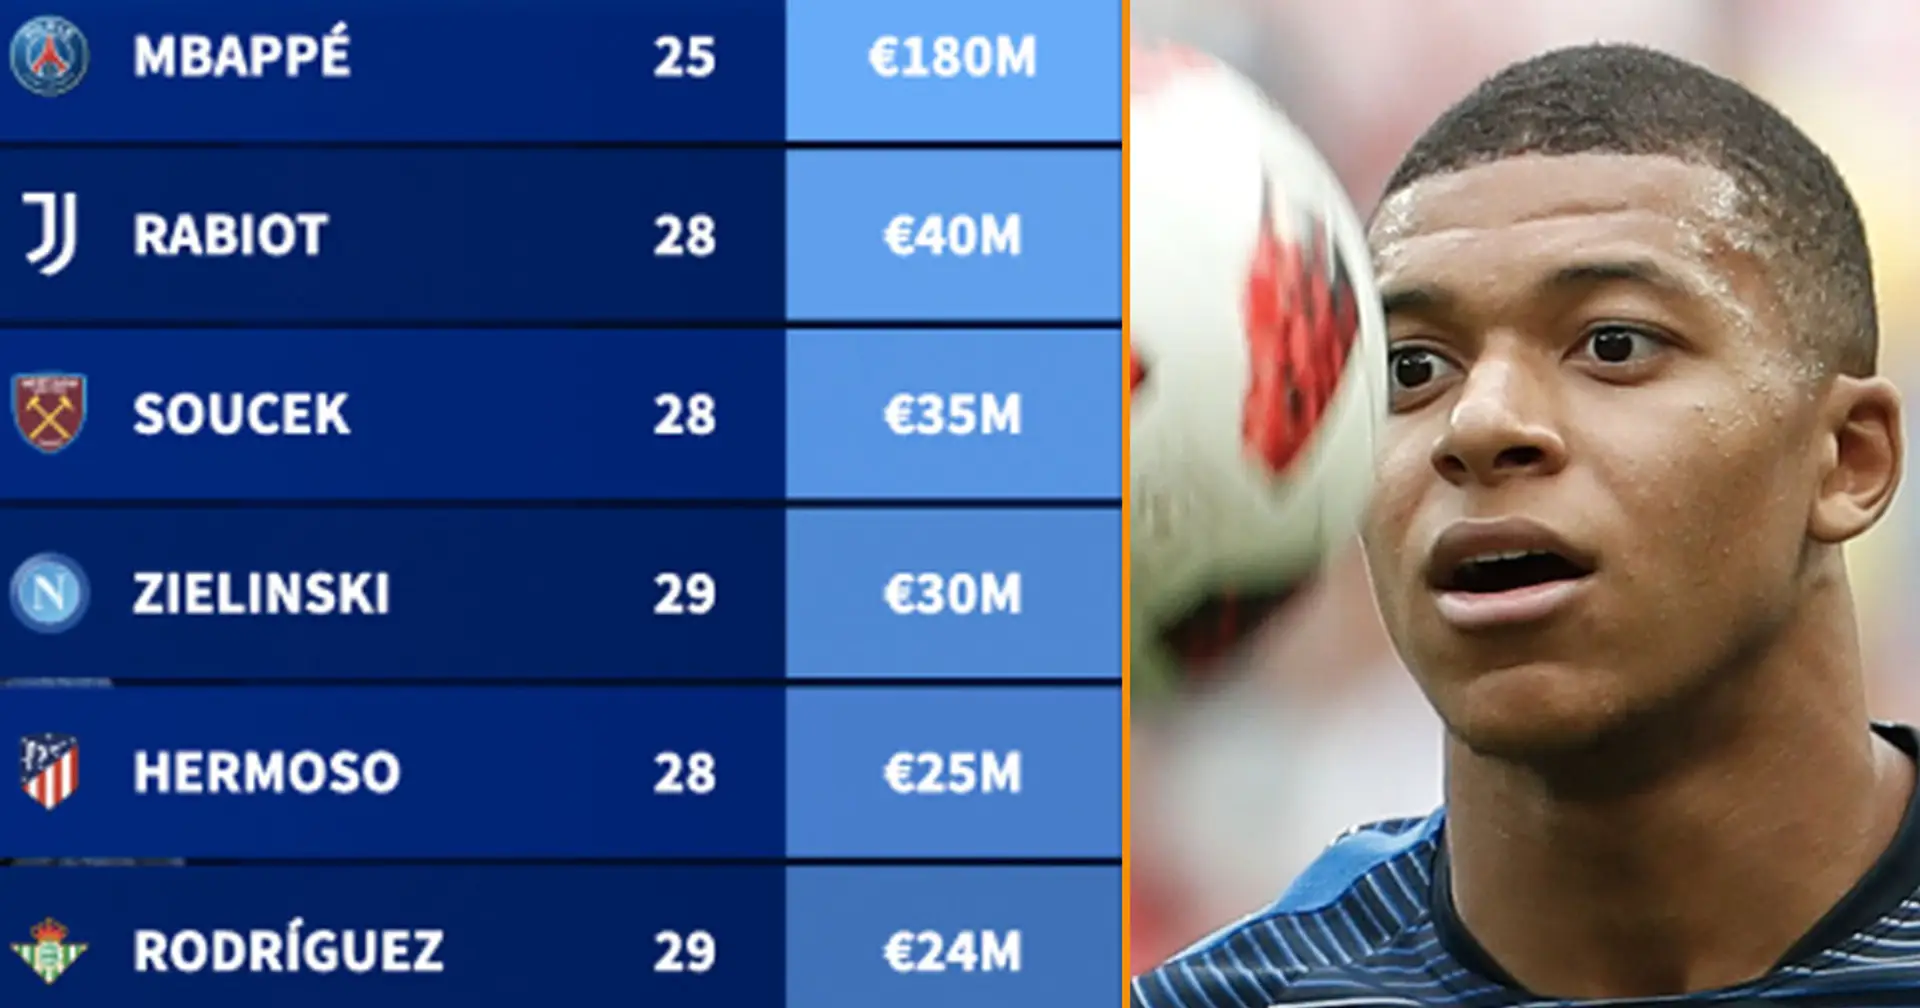 Mbappe, Wan-Bissaka and eight more highly valued players who can agree to change clubs in January